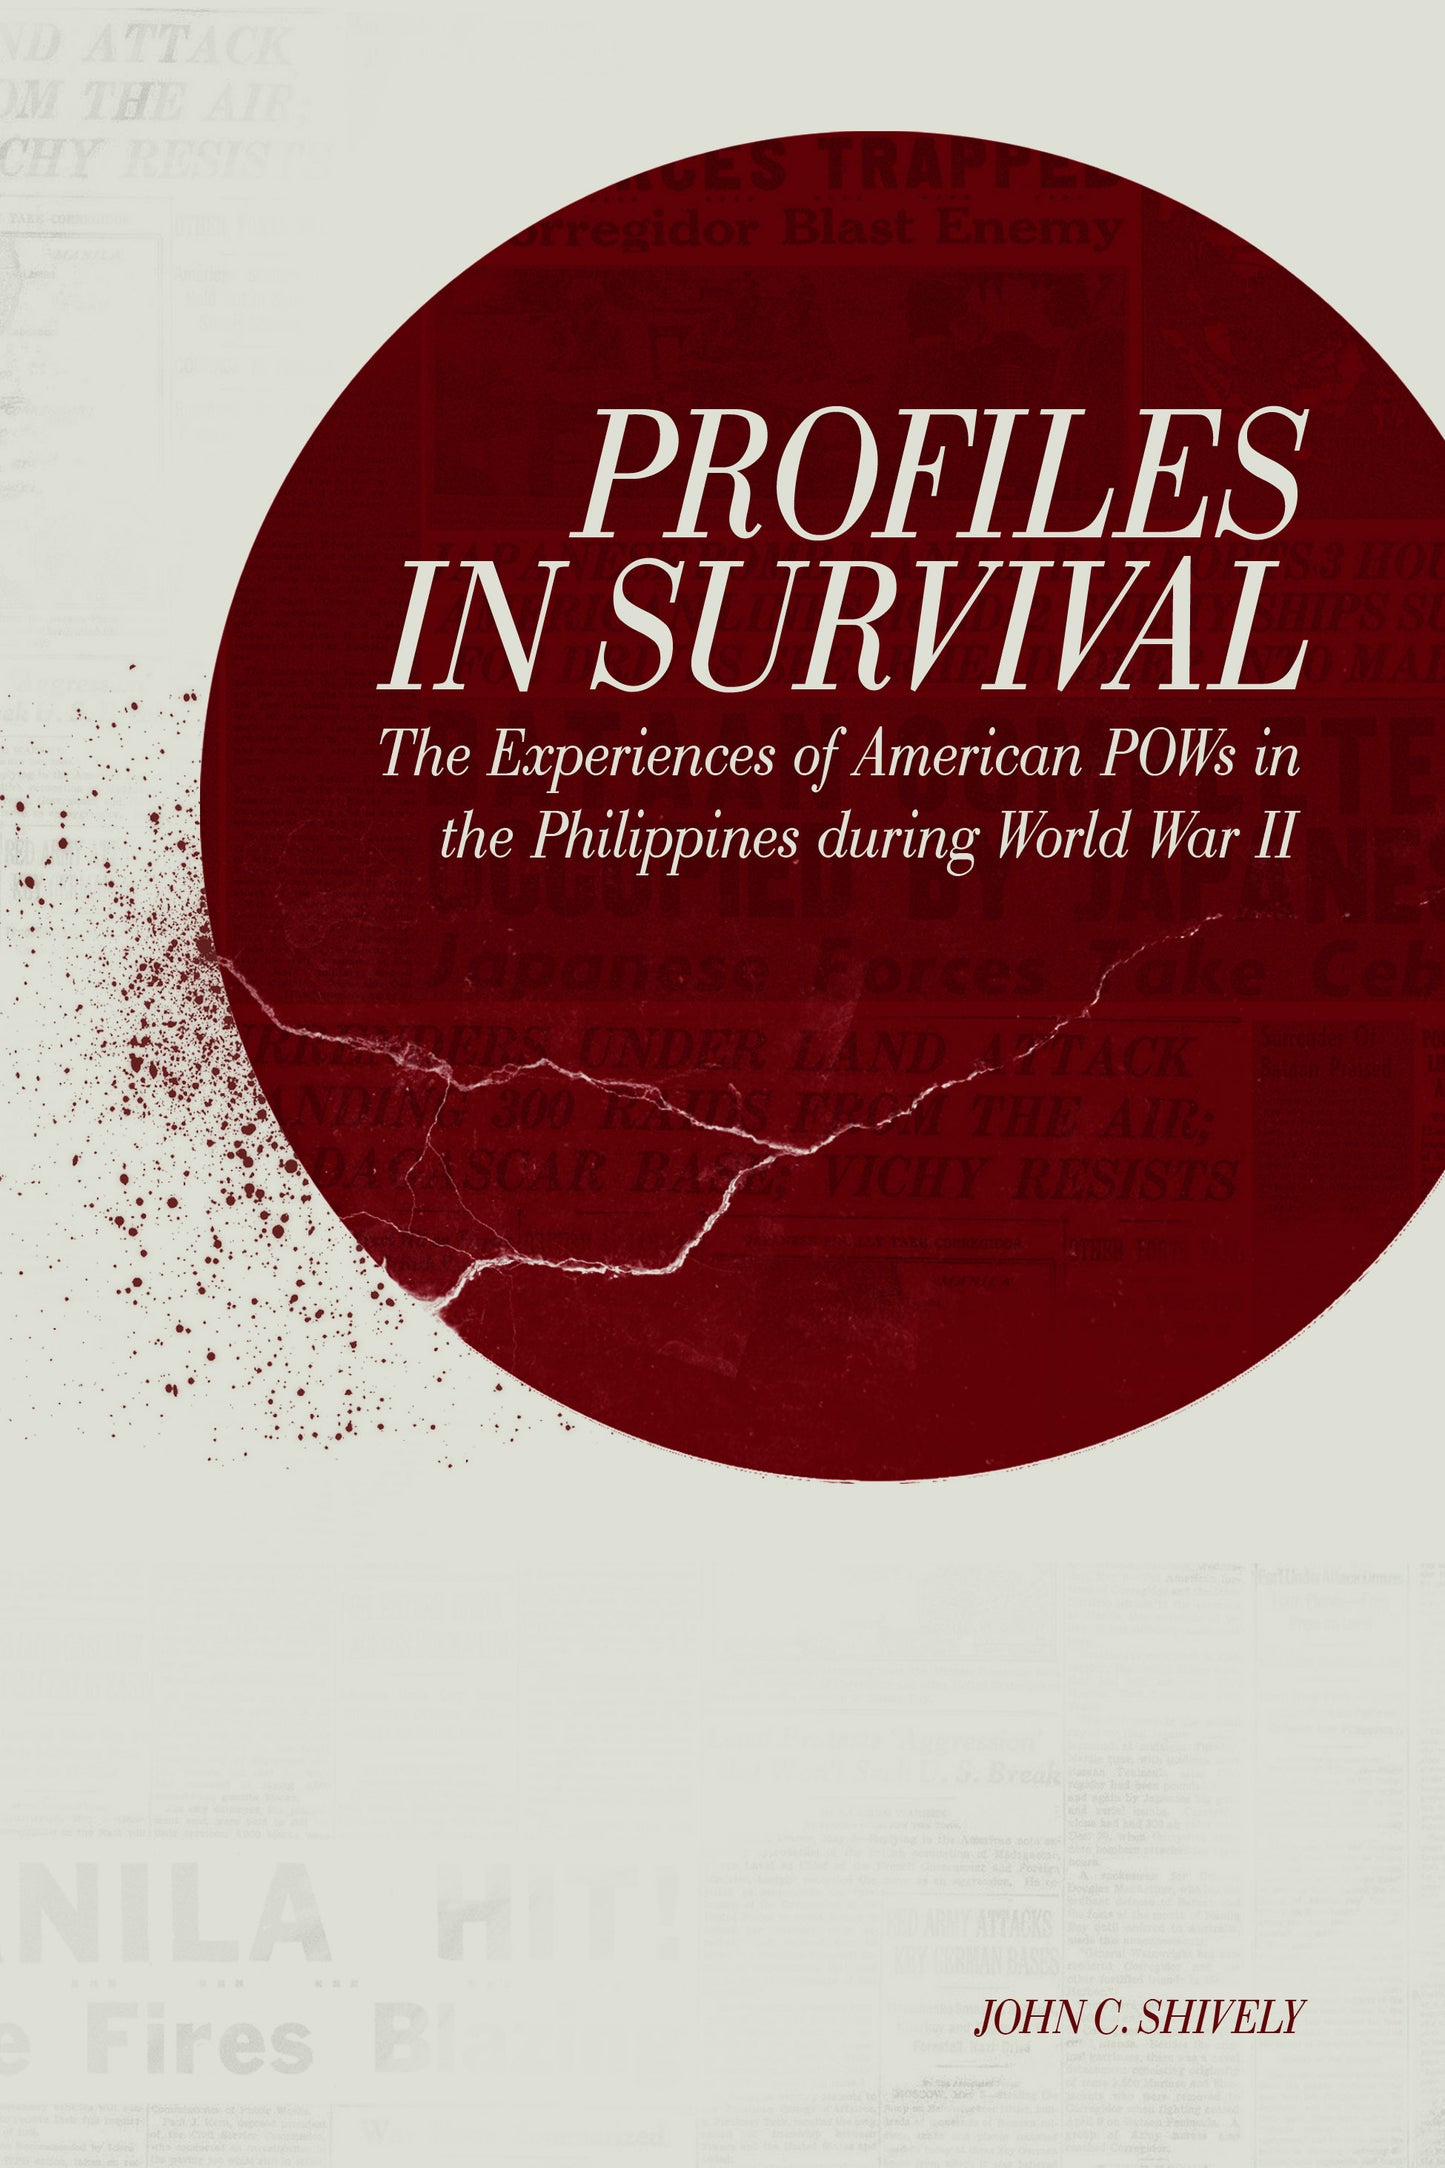 Profiles in Survival: The Experiences of American P.O.W.s in the Philippines During World War II